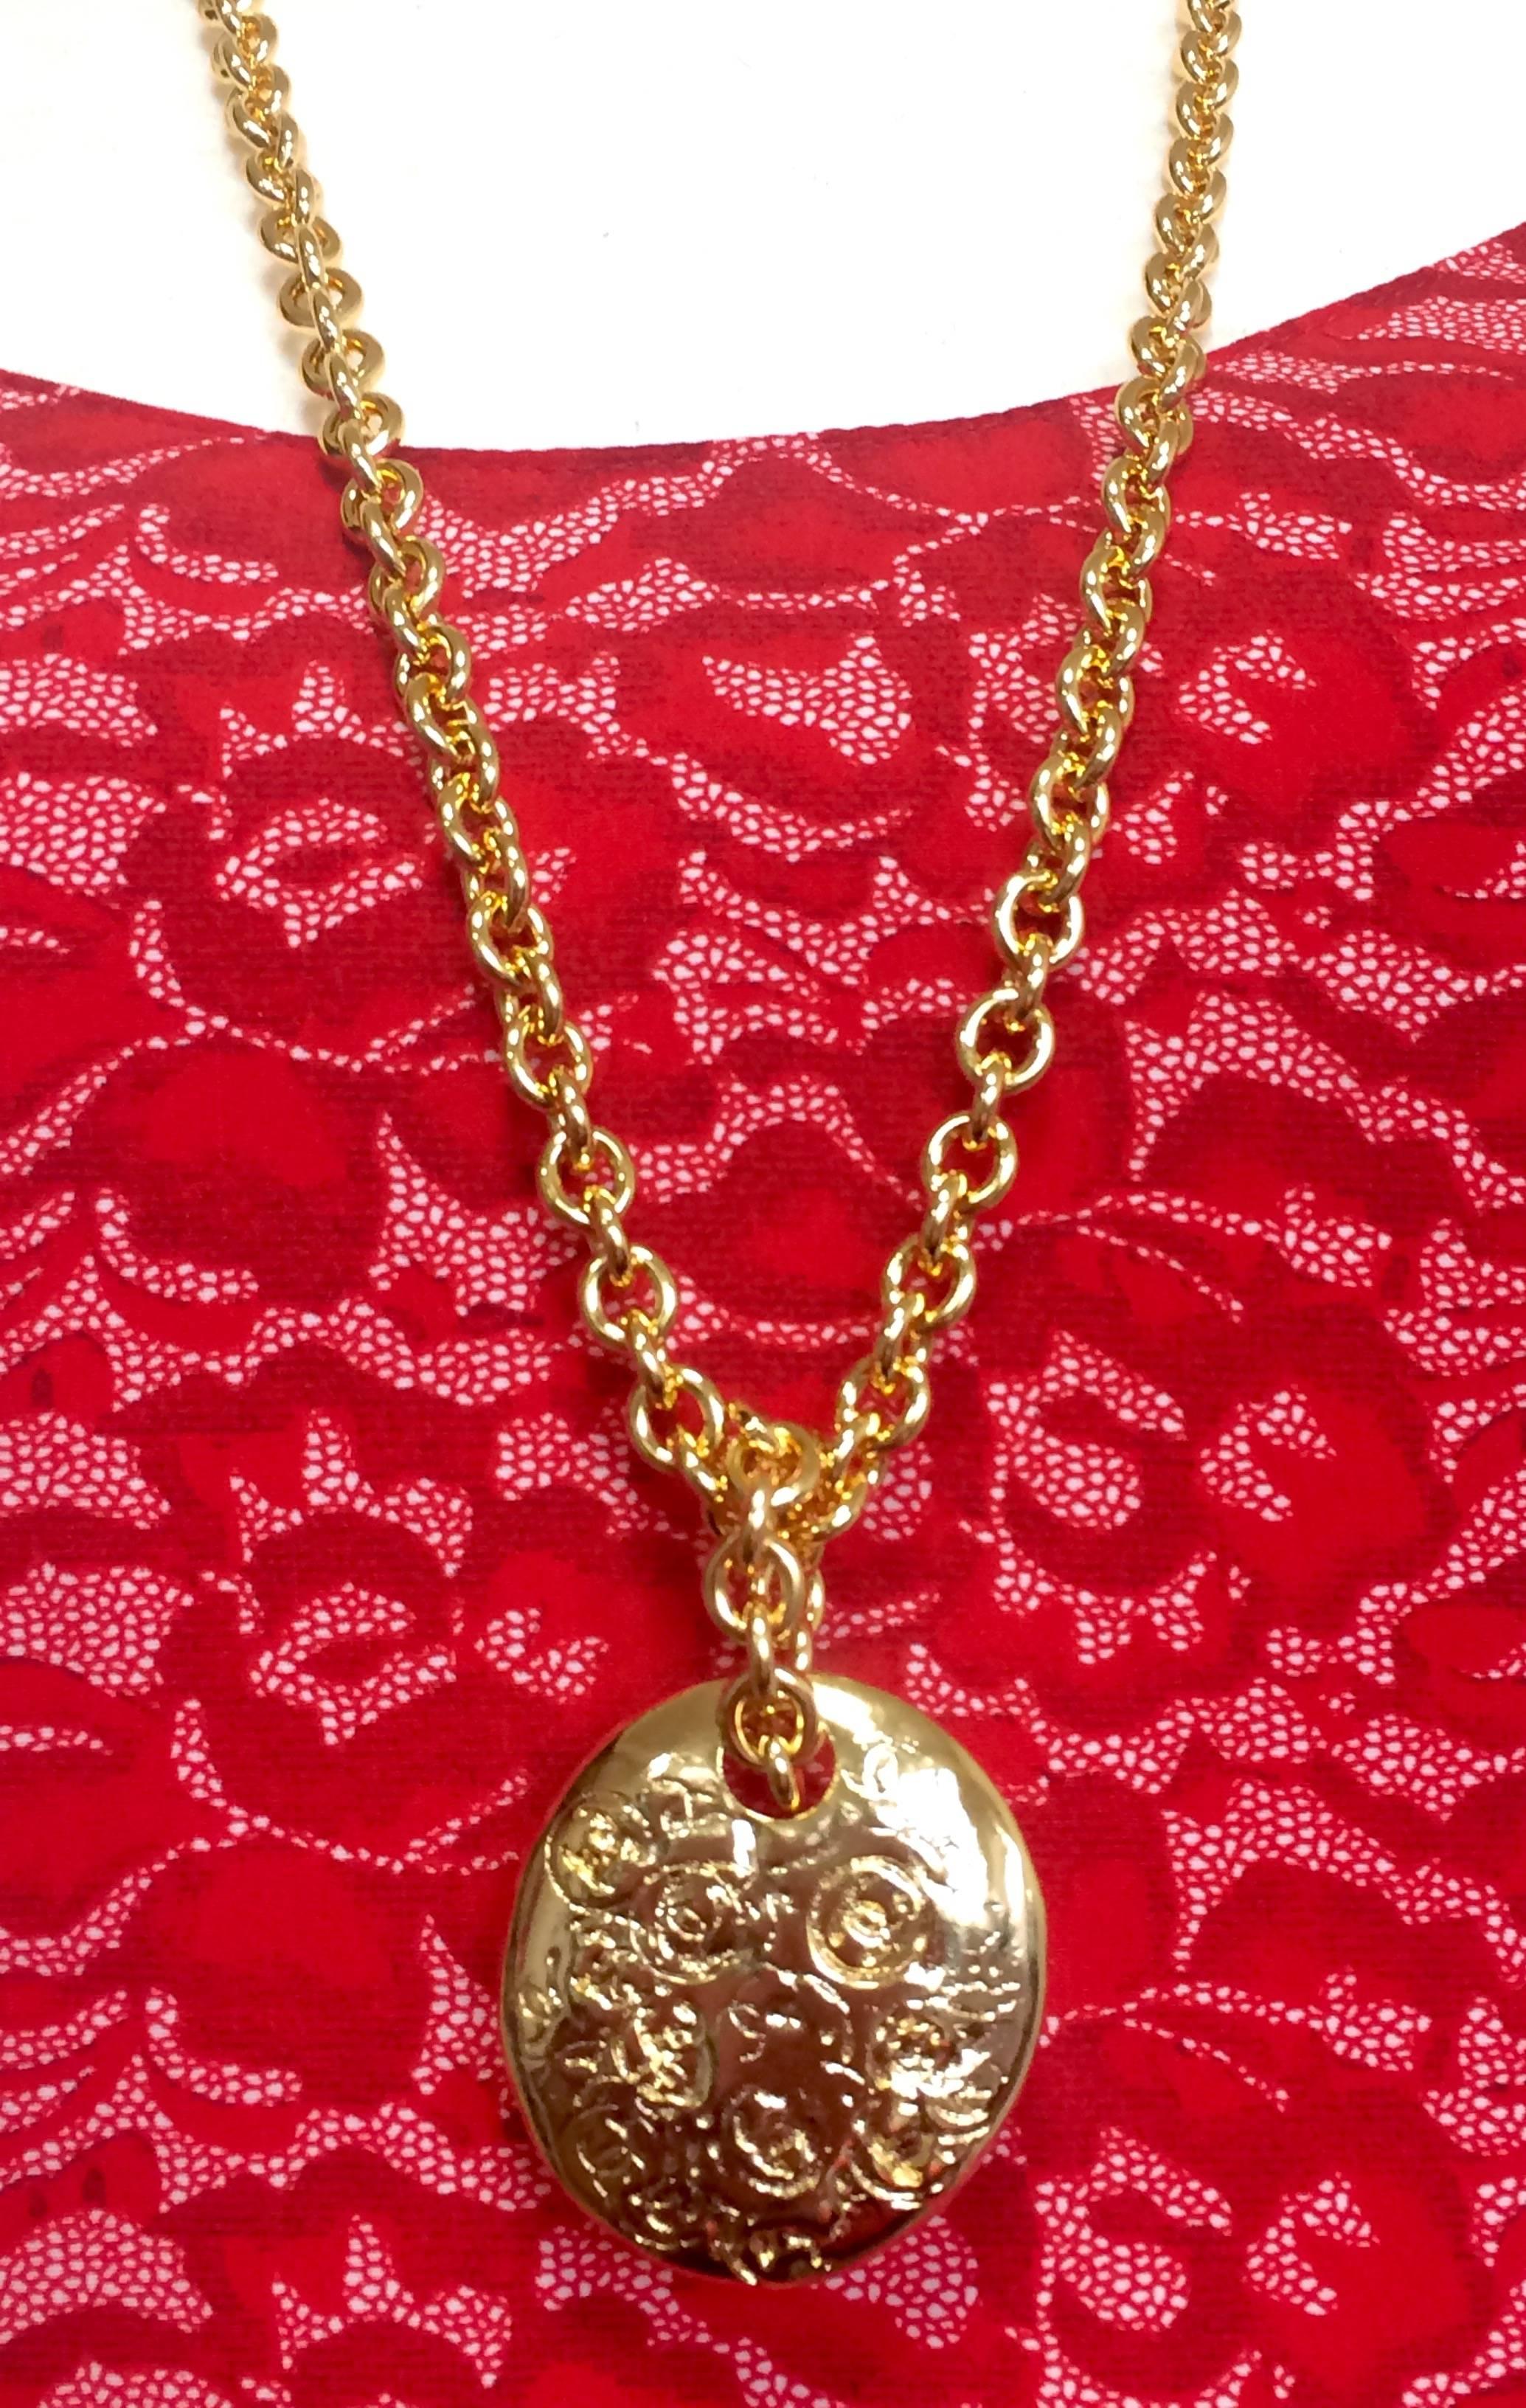 MINT. Vintage CHANEL golden long chain necklace with round coin, medal shape top 3